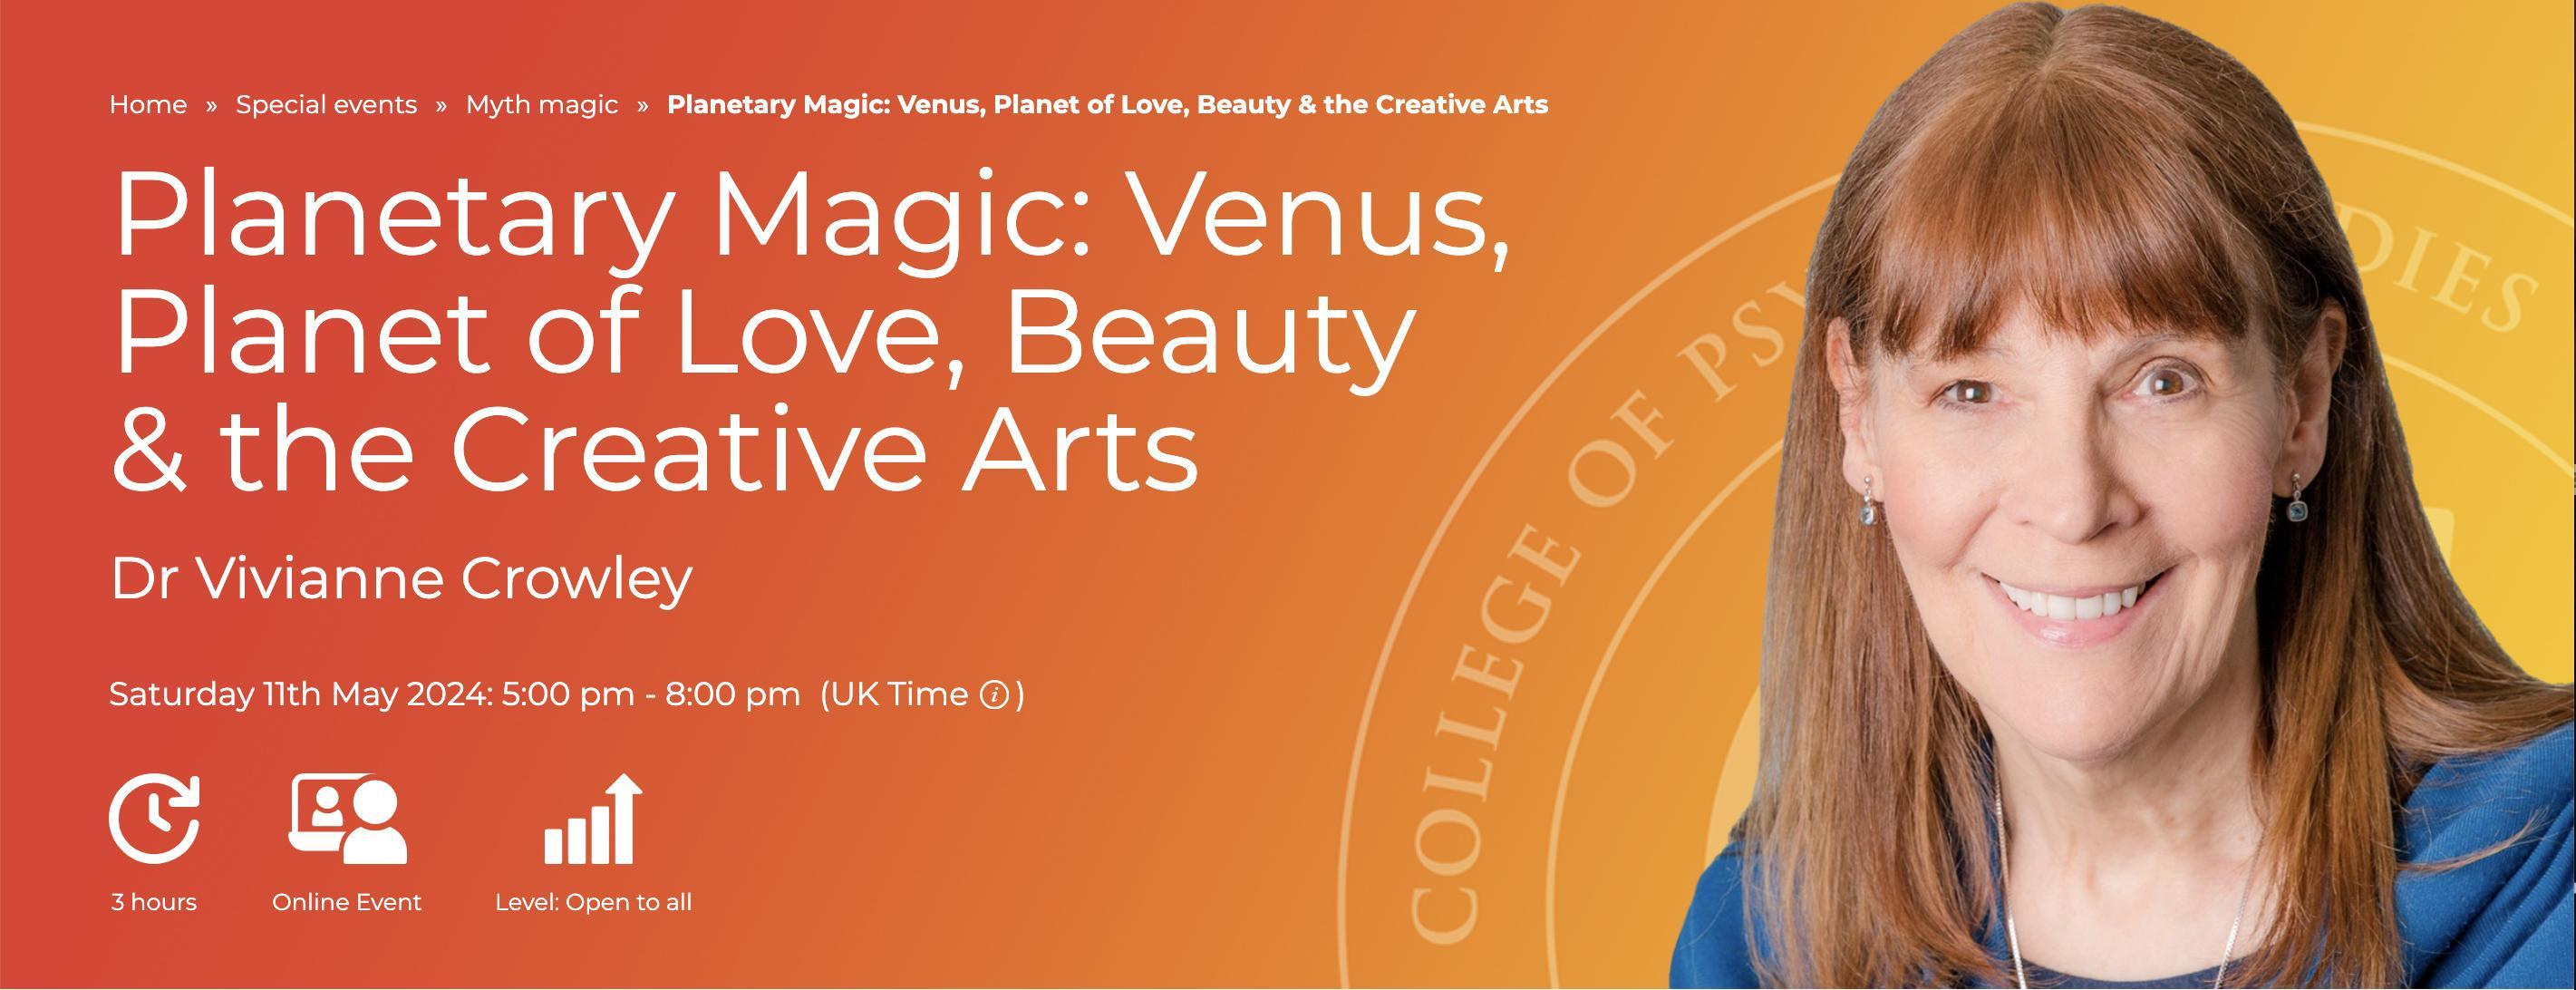 banner with link to Venus planetary magic class